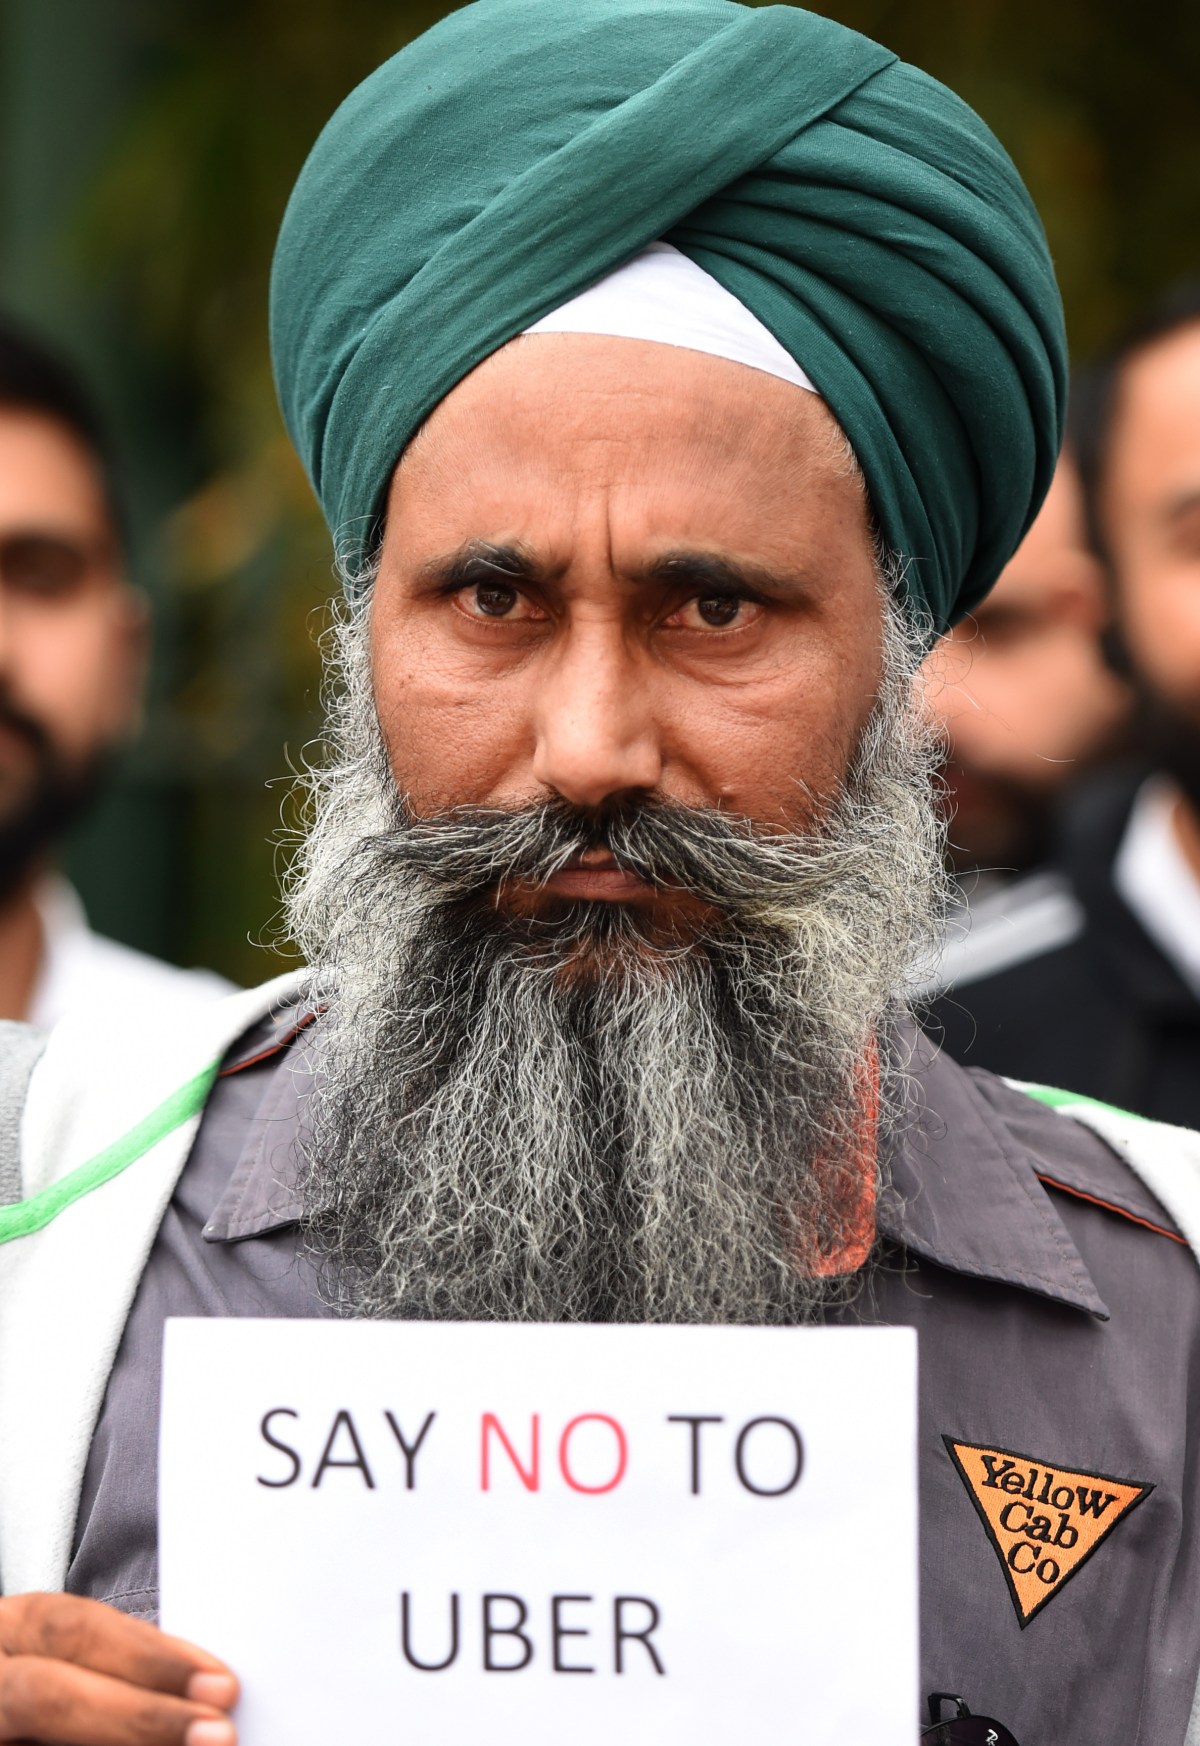 Taxi drivers attend an Uber protest in Brisbane, Thursday, Sept. 10, 2015. They were protesting against the lack of regulation of the Uber ride sharing service. (AAP Image/Dan Peled) NO ARCHIVING